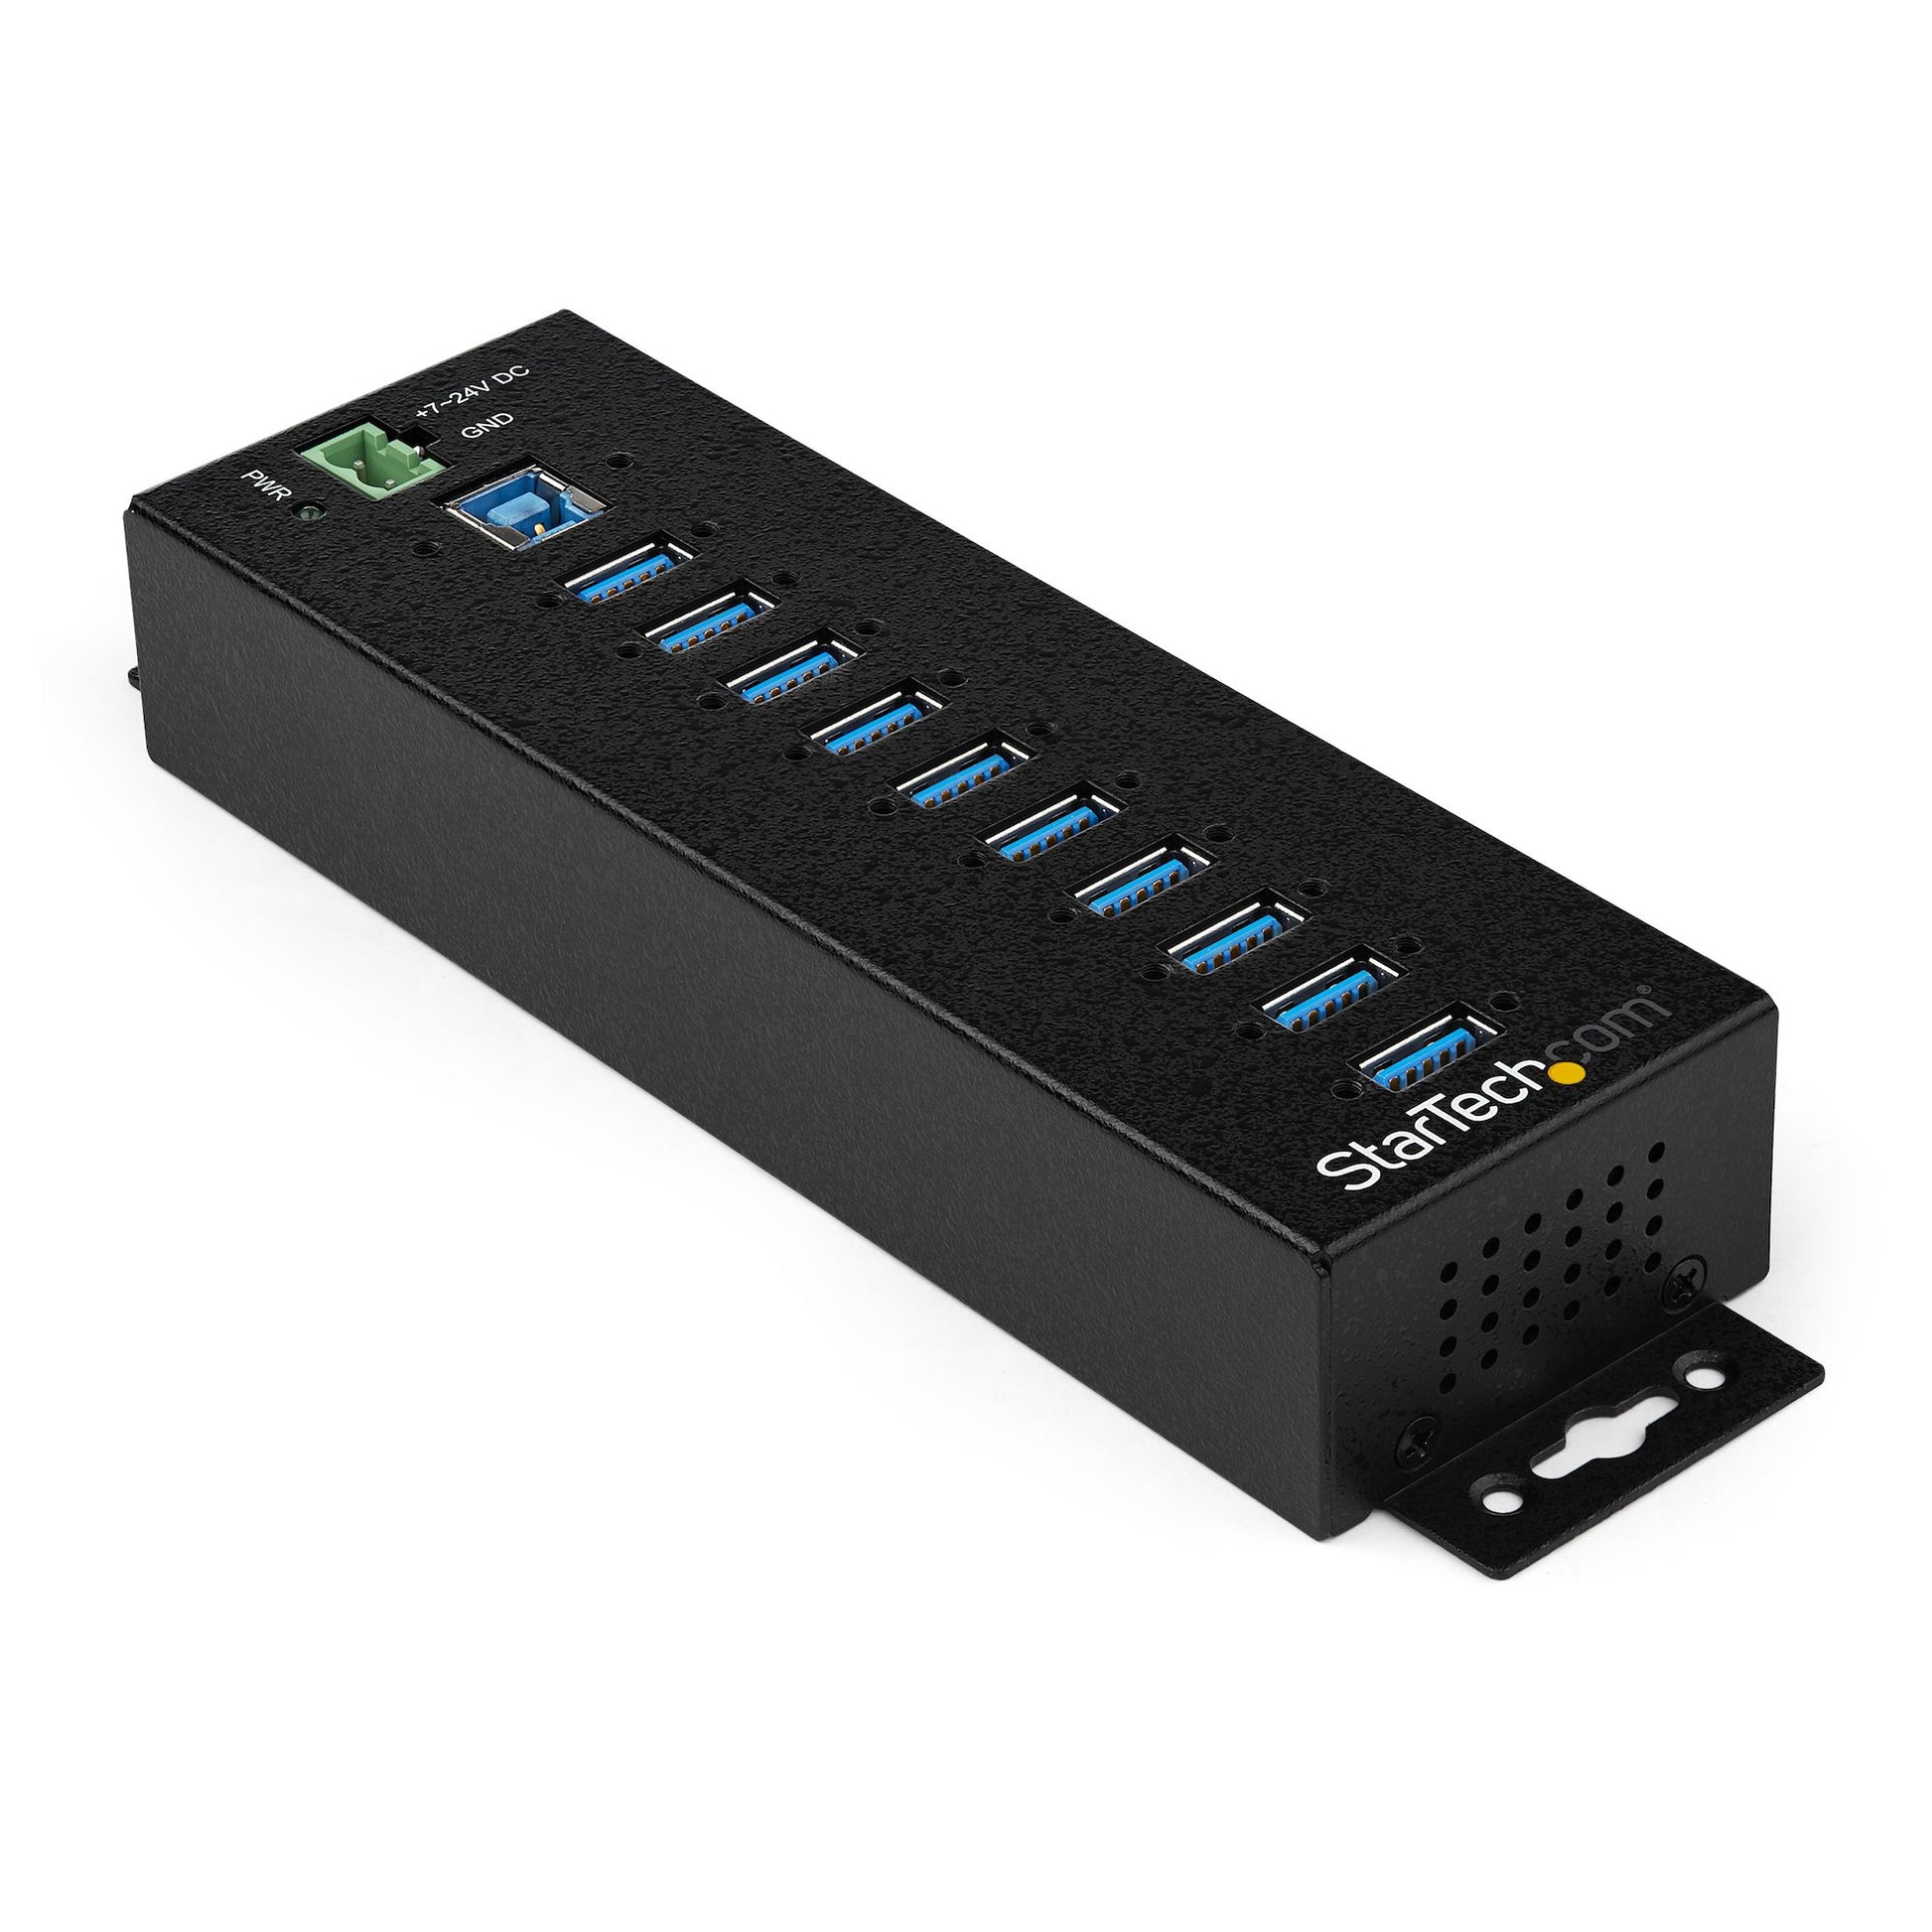 StarTech.com 10-Port USB 3.0 Hub with Power Adapter - Metal Industrial USB-A Hub with ESD & 350W Surge Protection - Din/Wall/Desk Mountable - High Speed USB 3.2 Gen 1 (5Gbps) Hub-0